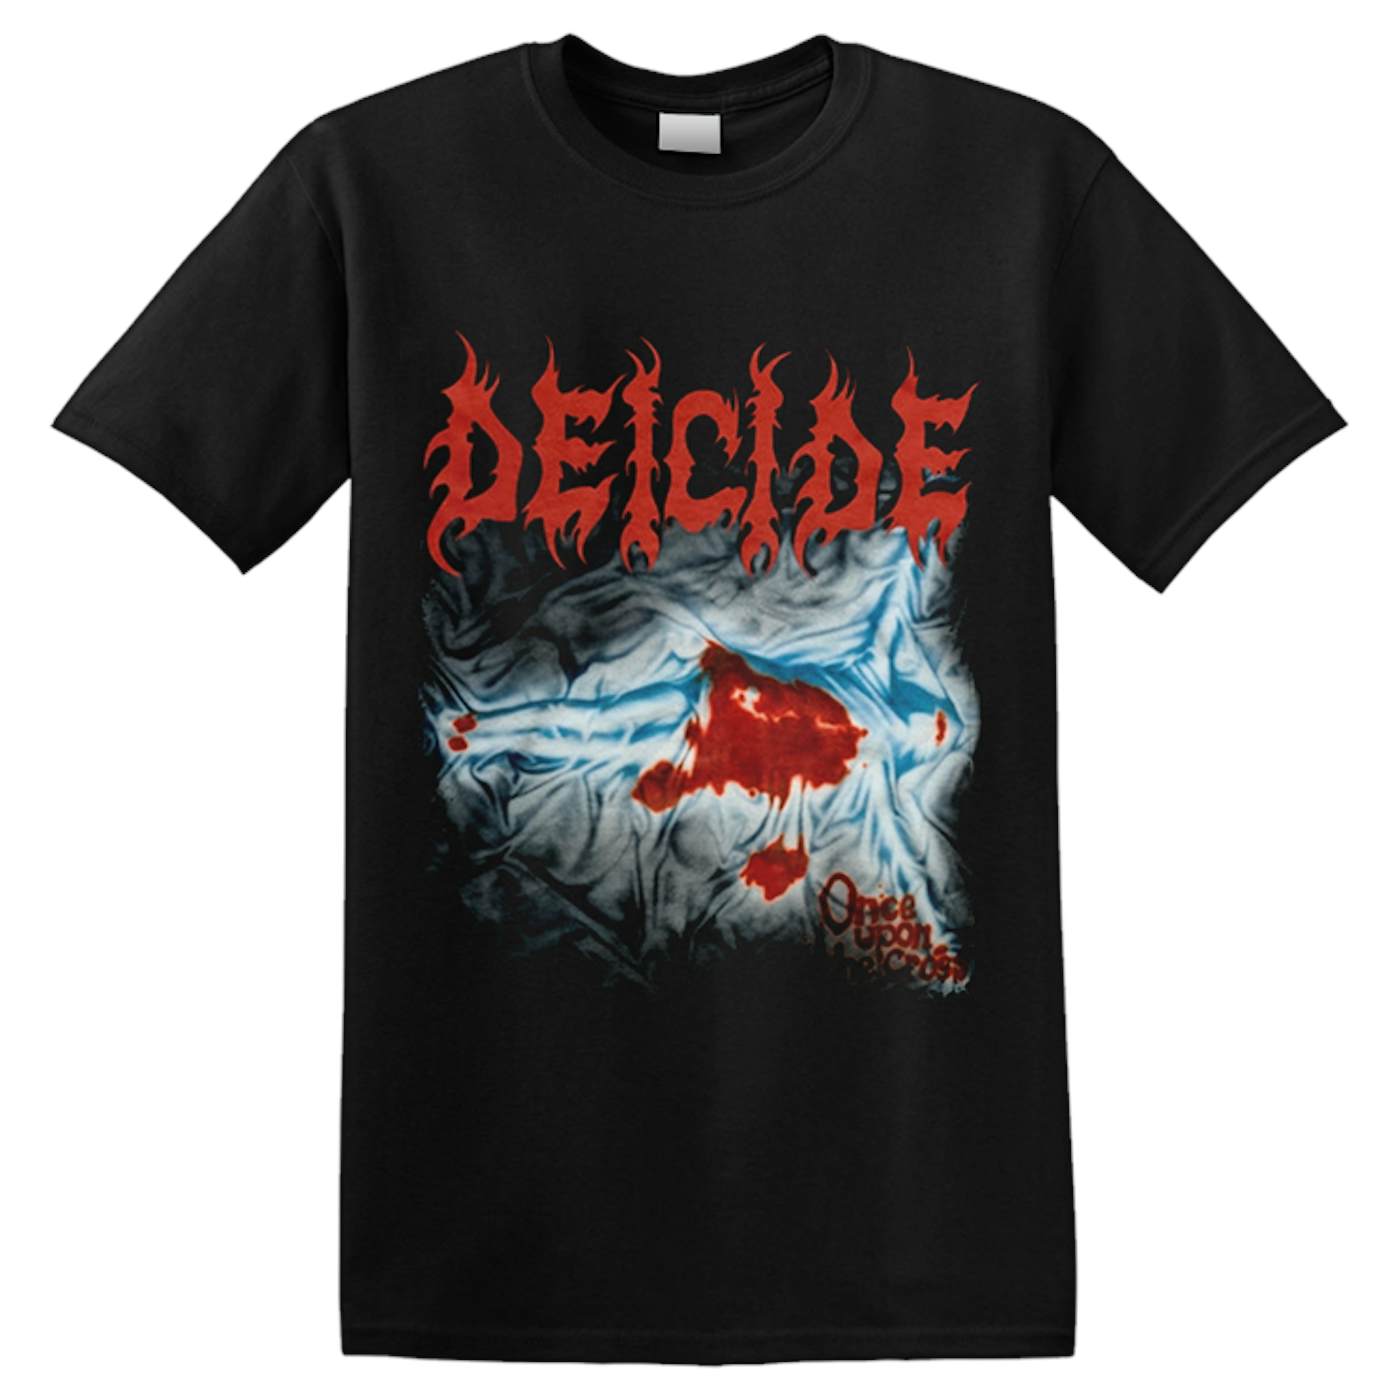 Deicide T-Shirt - Once Upon The Cross (Black)